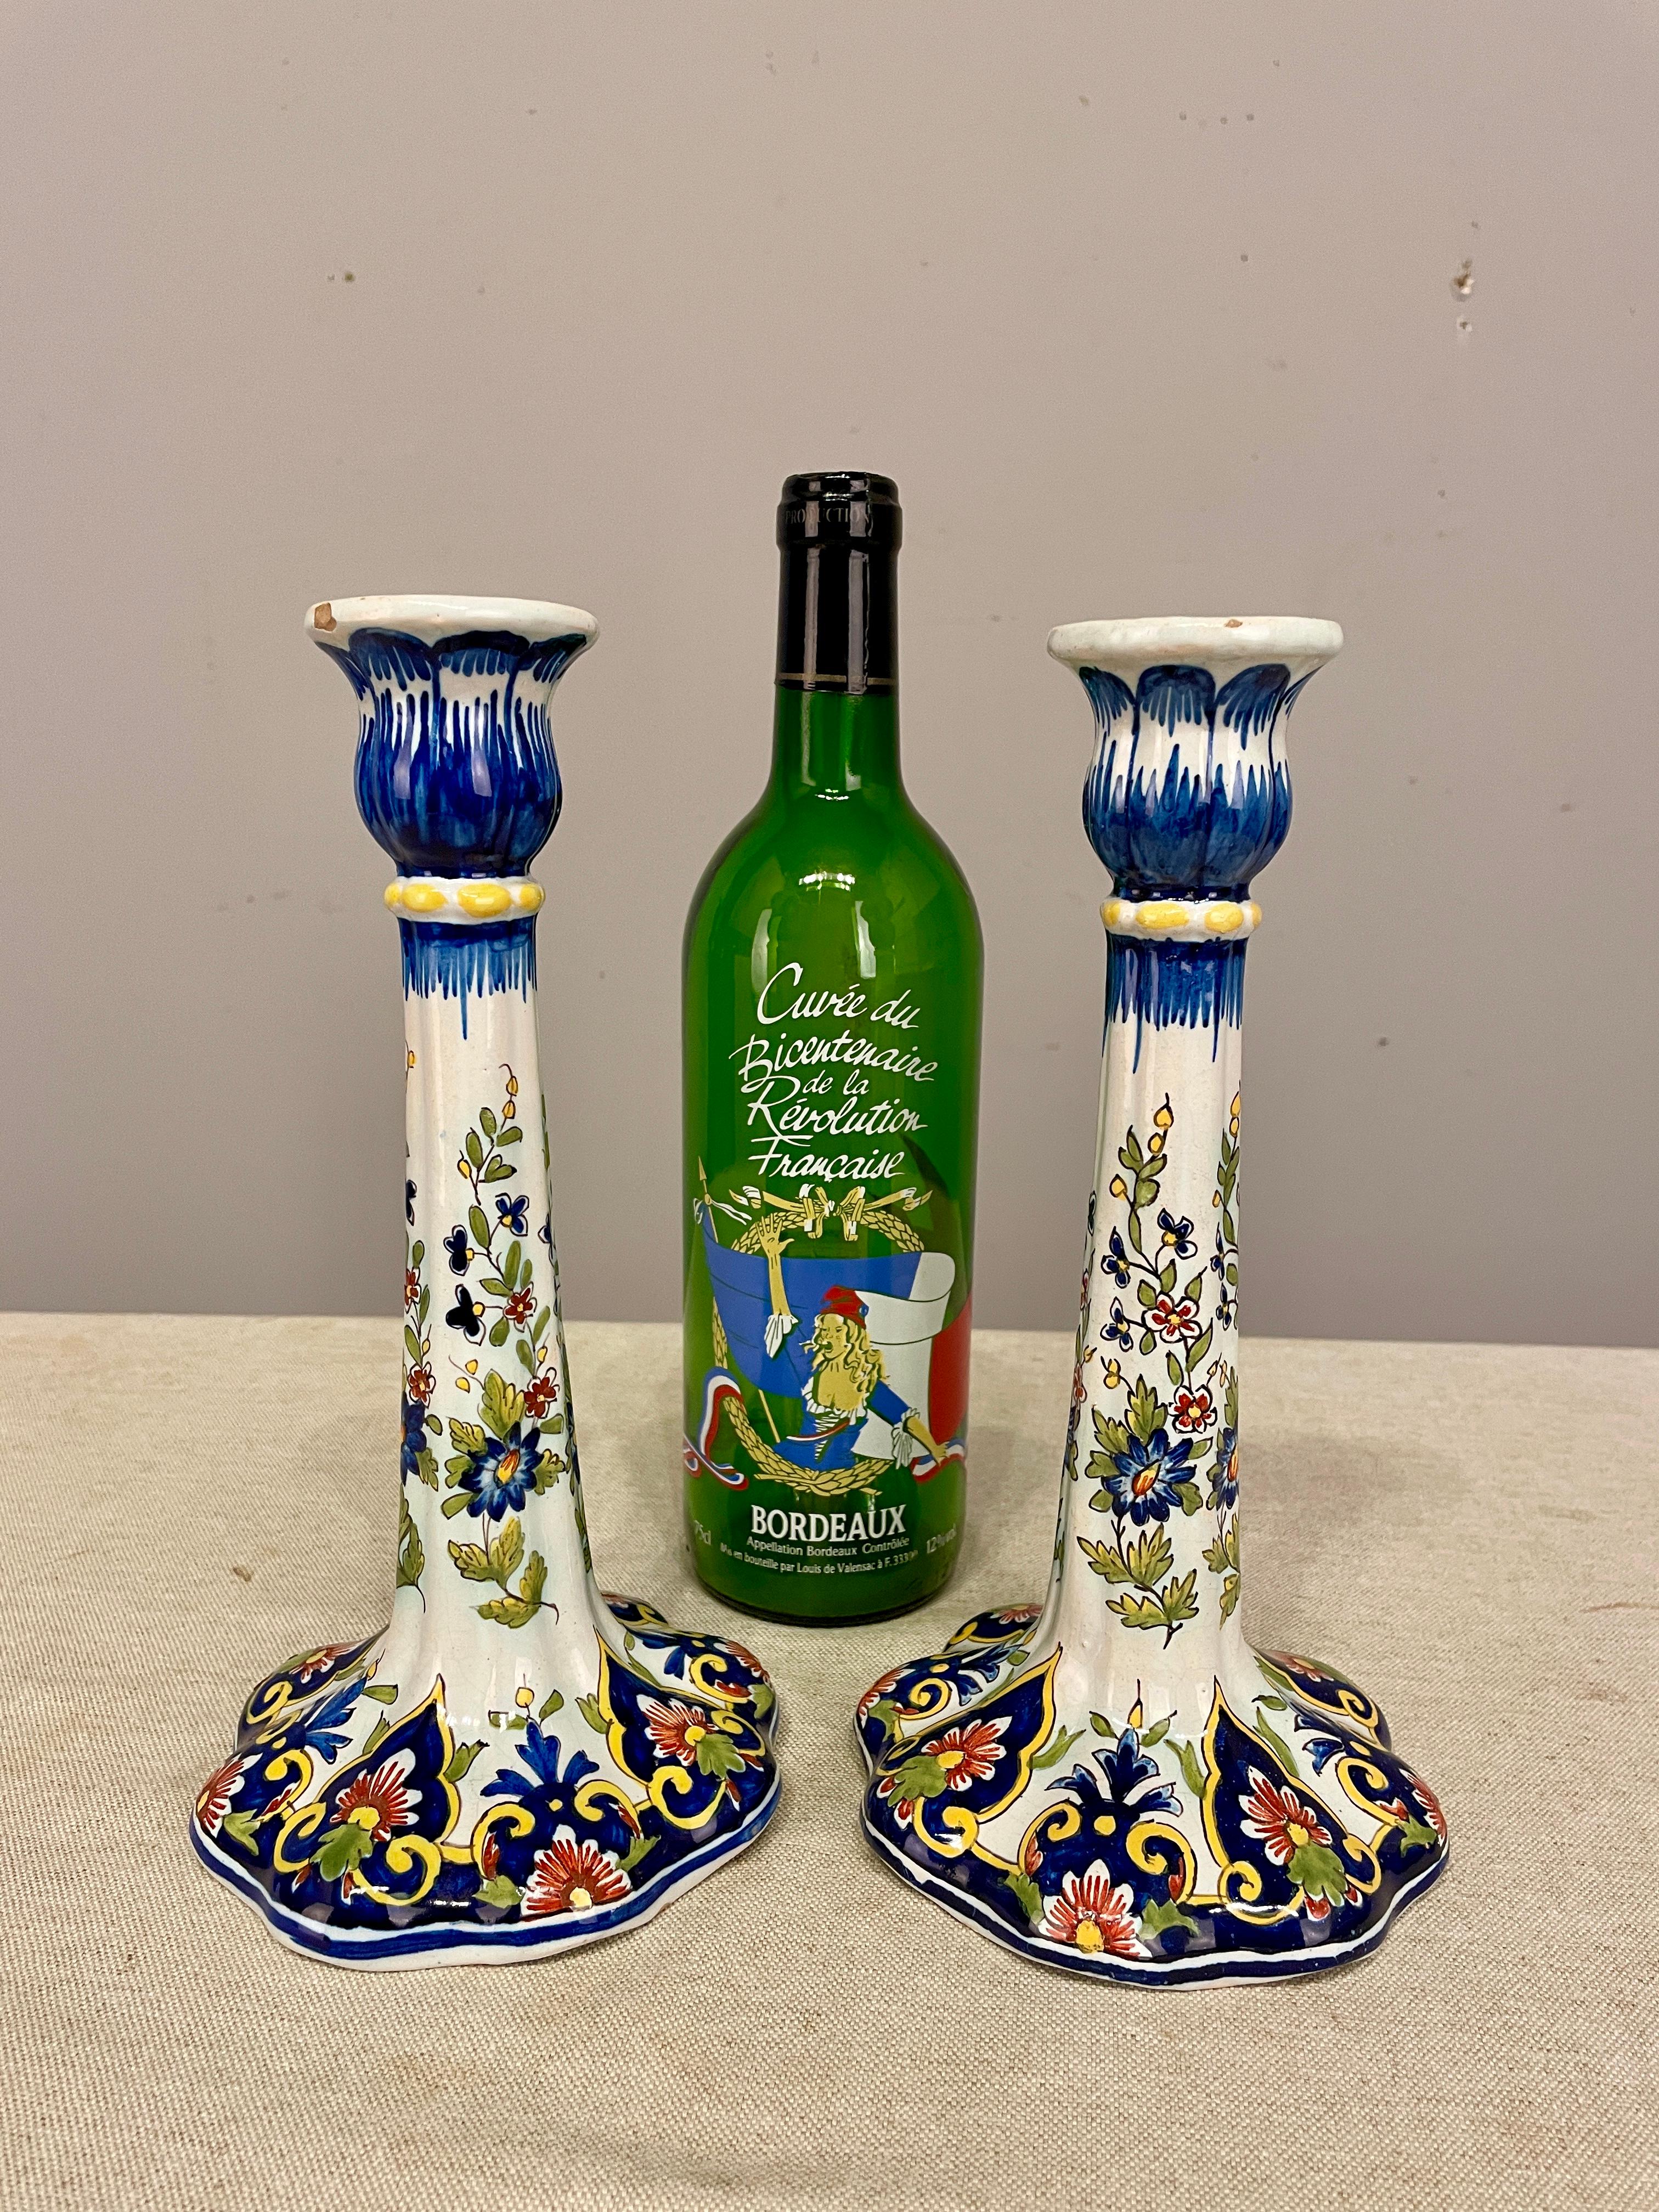 An early 20th pair of French Faience Candlestick with the Rouen Decor, from the faiencerie of Desvres, signed on bottom Mosanic. Note : one chip on the top. See last picture. 
Dimensions are 5